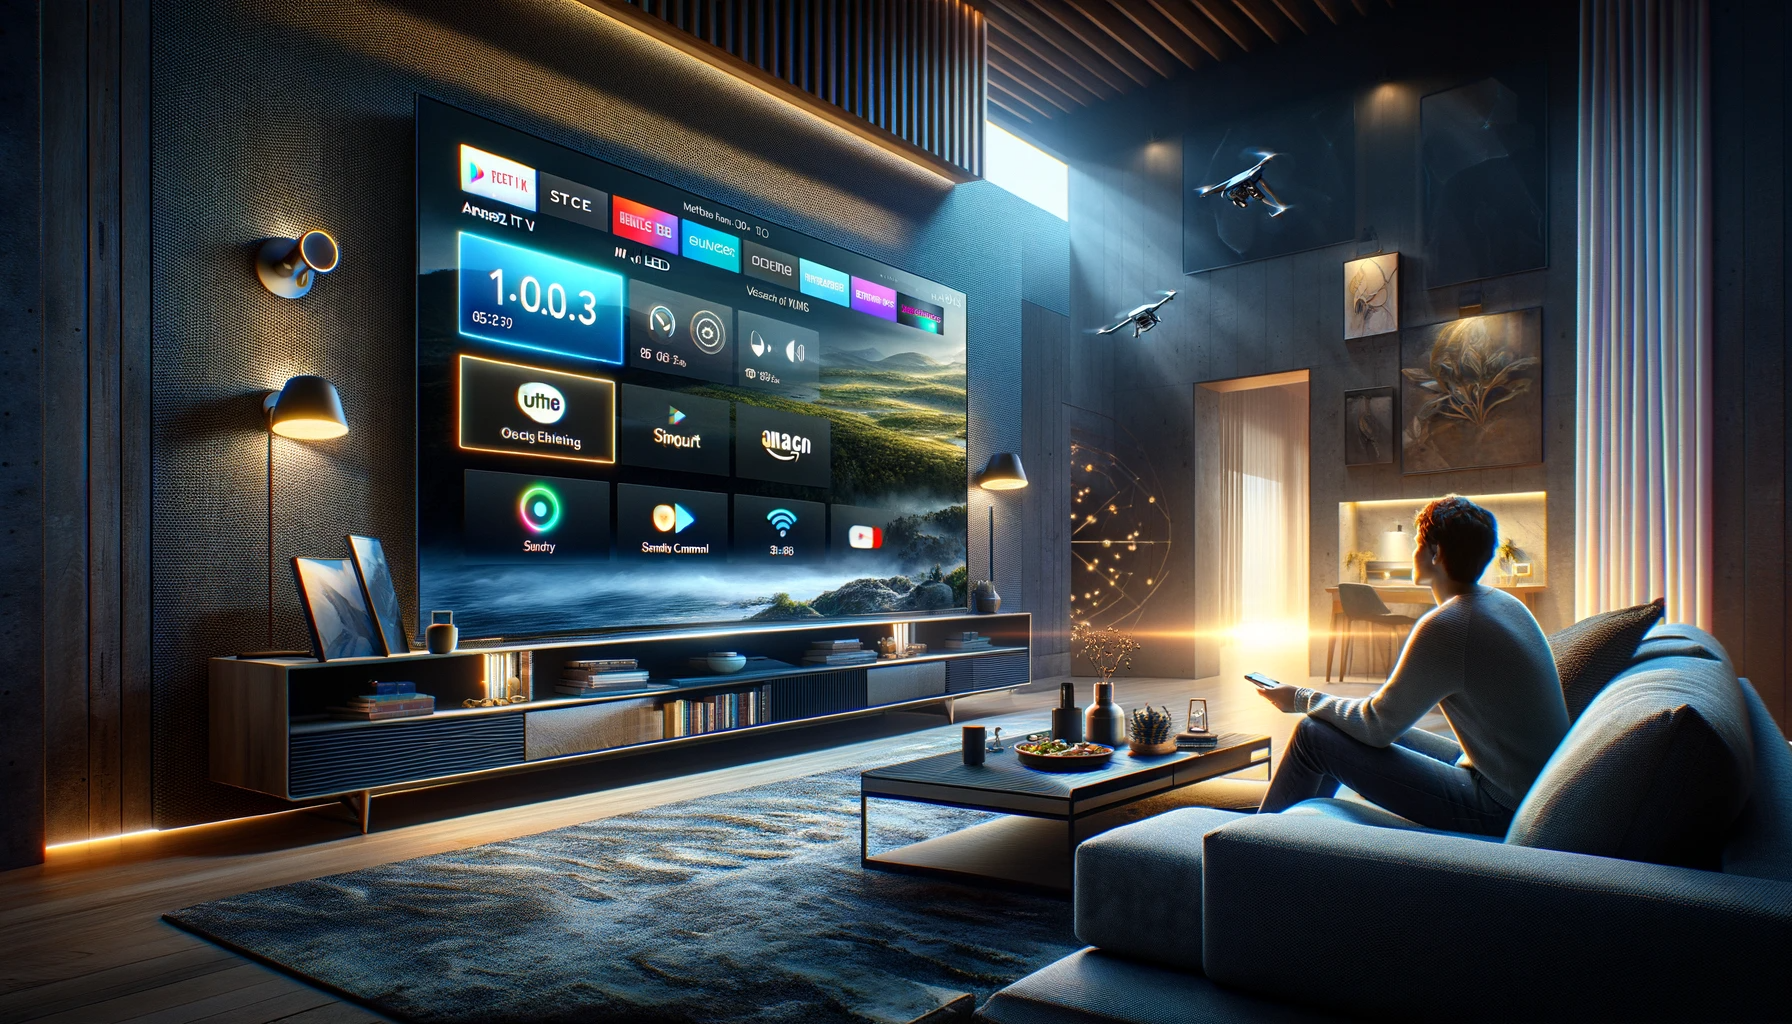 comprehensive review of the Amazon Fire TV 65 Omni QLED series